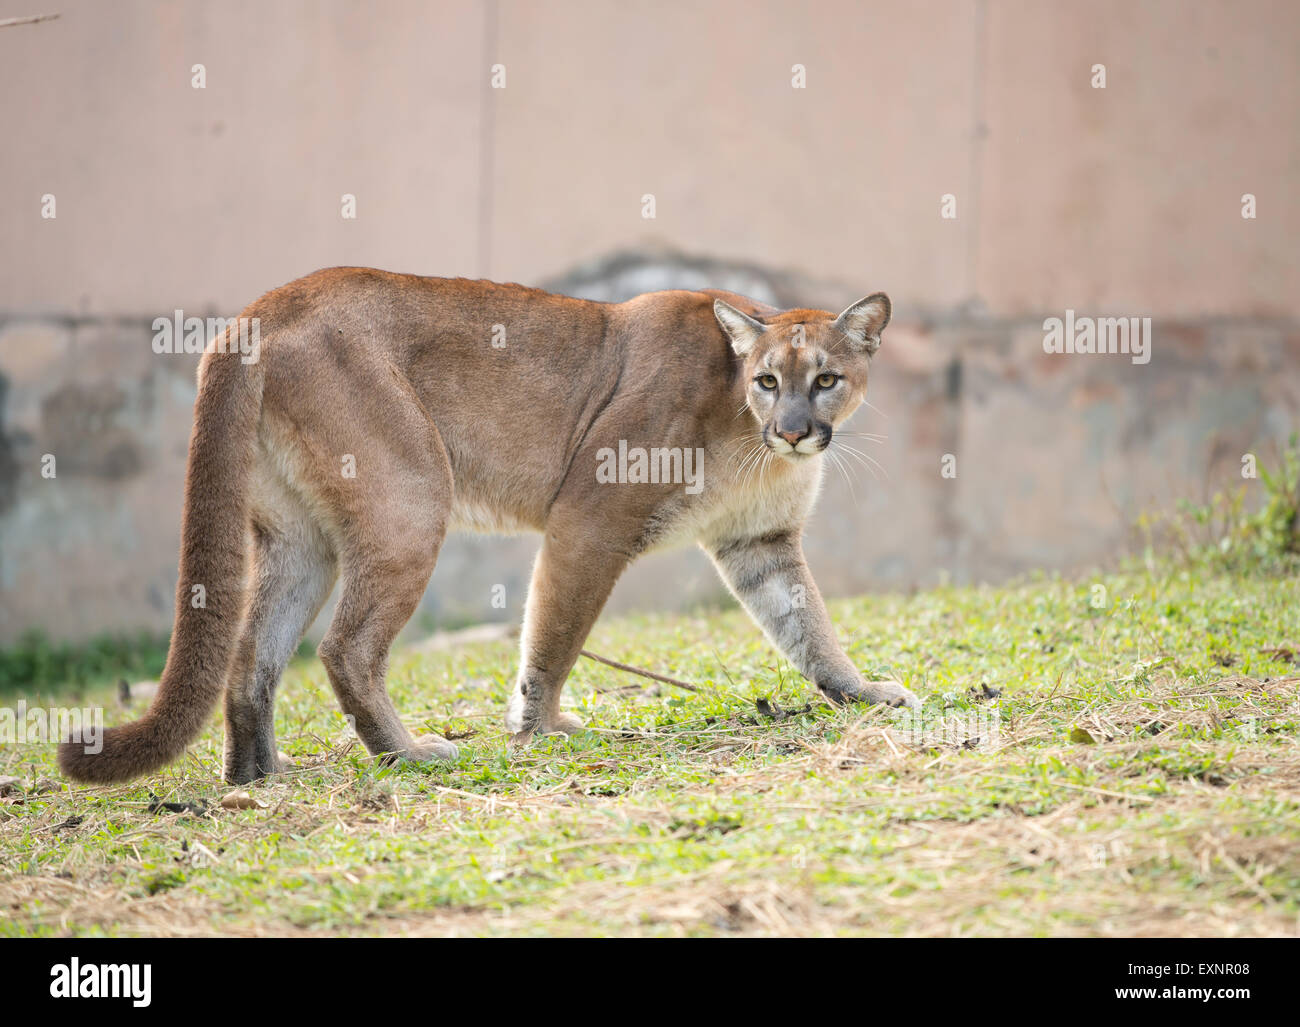 puma or cougar in zoo Stock Photo